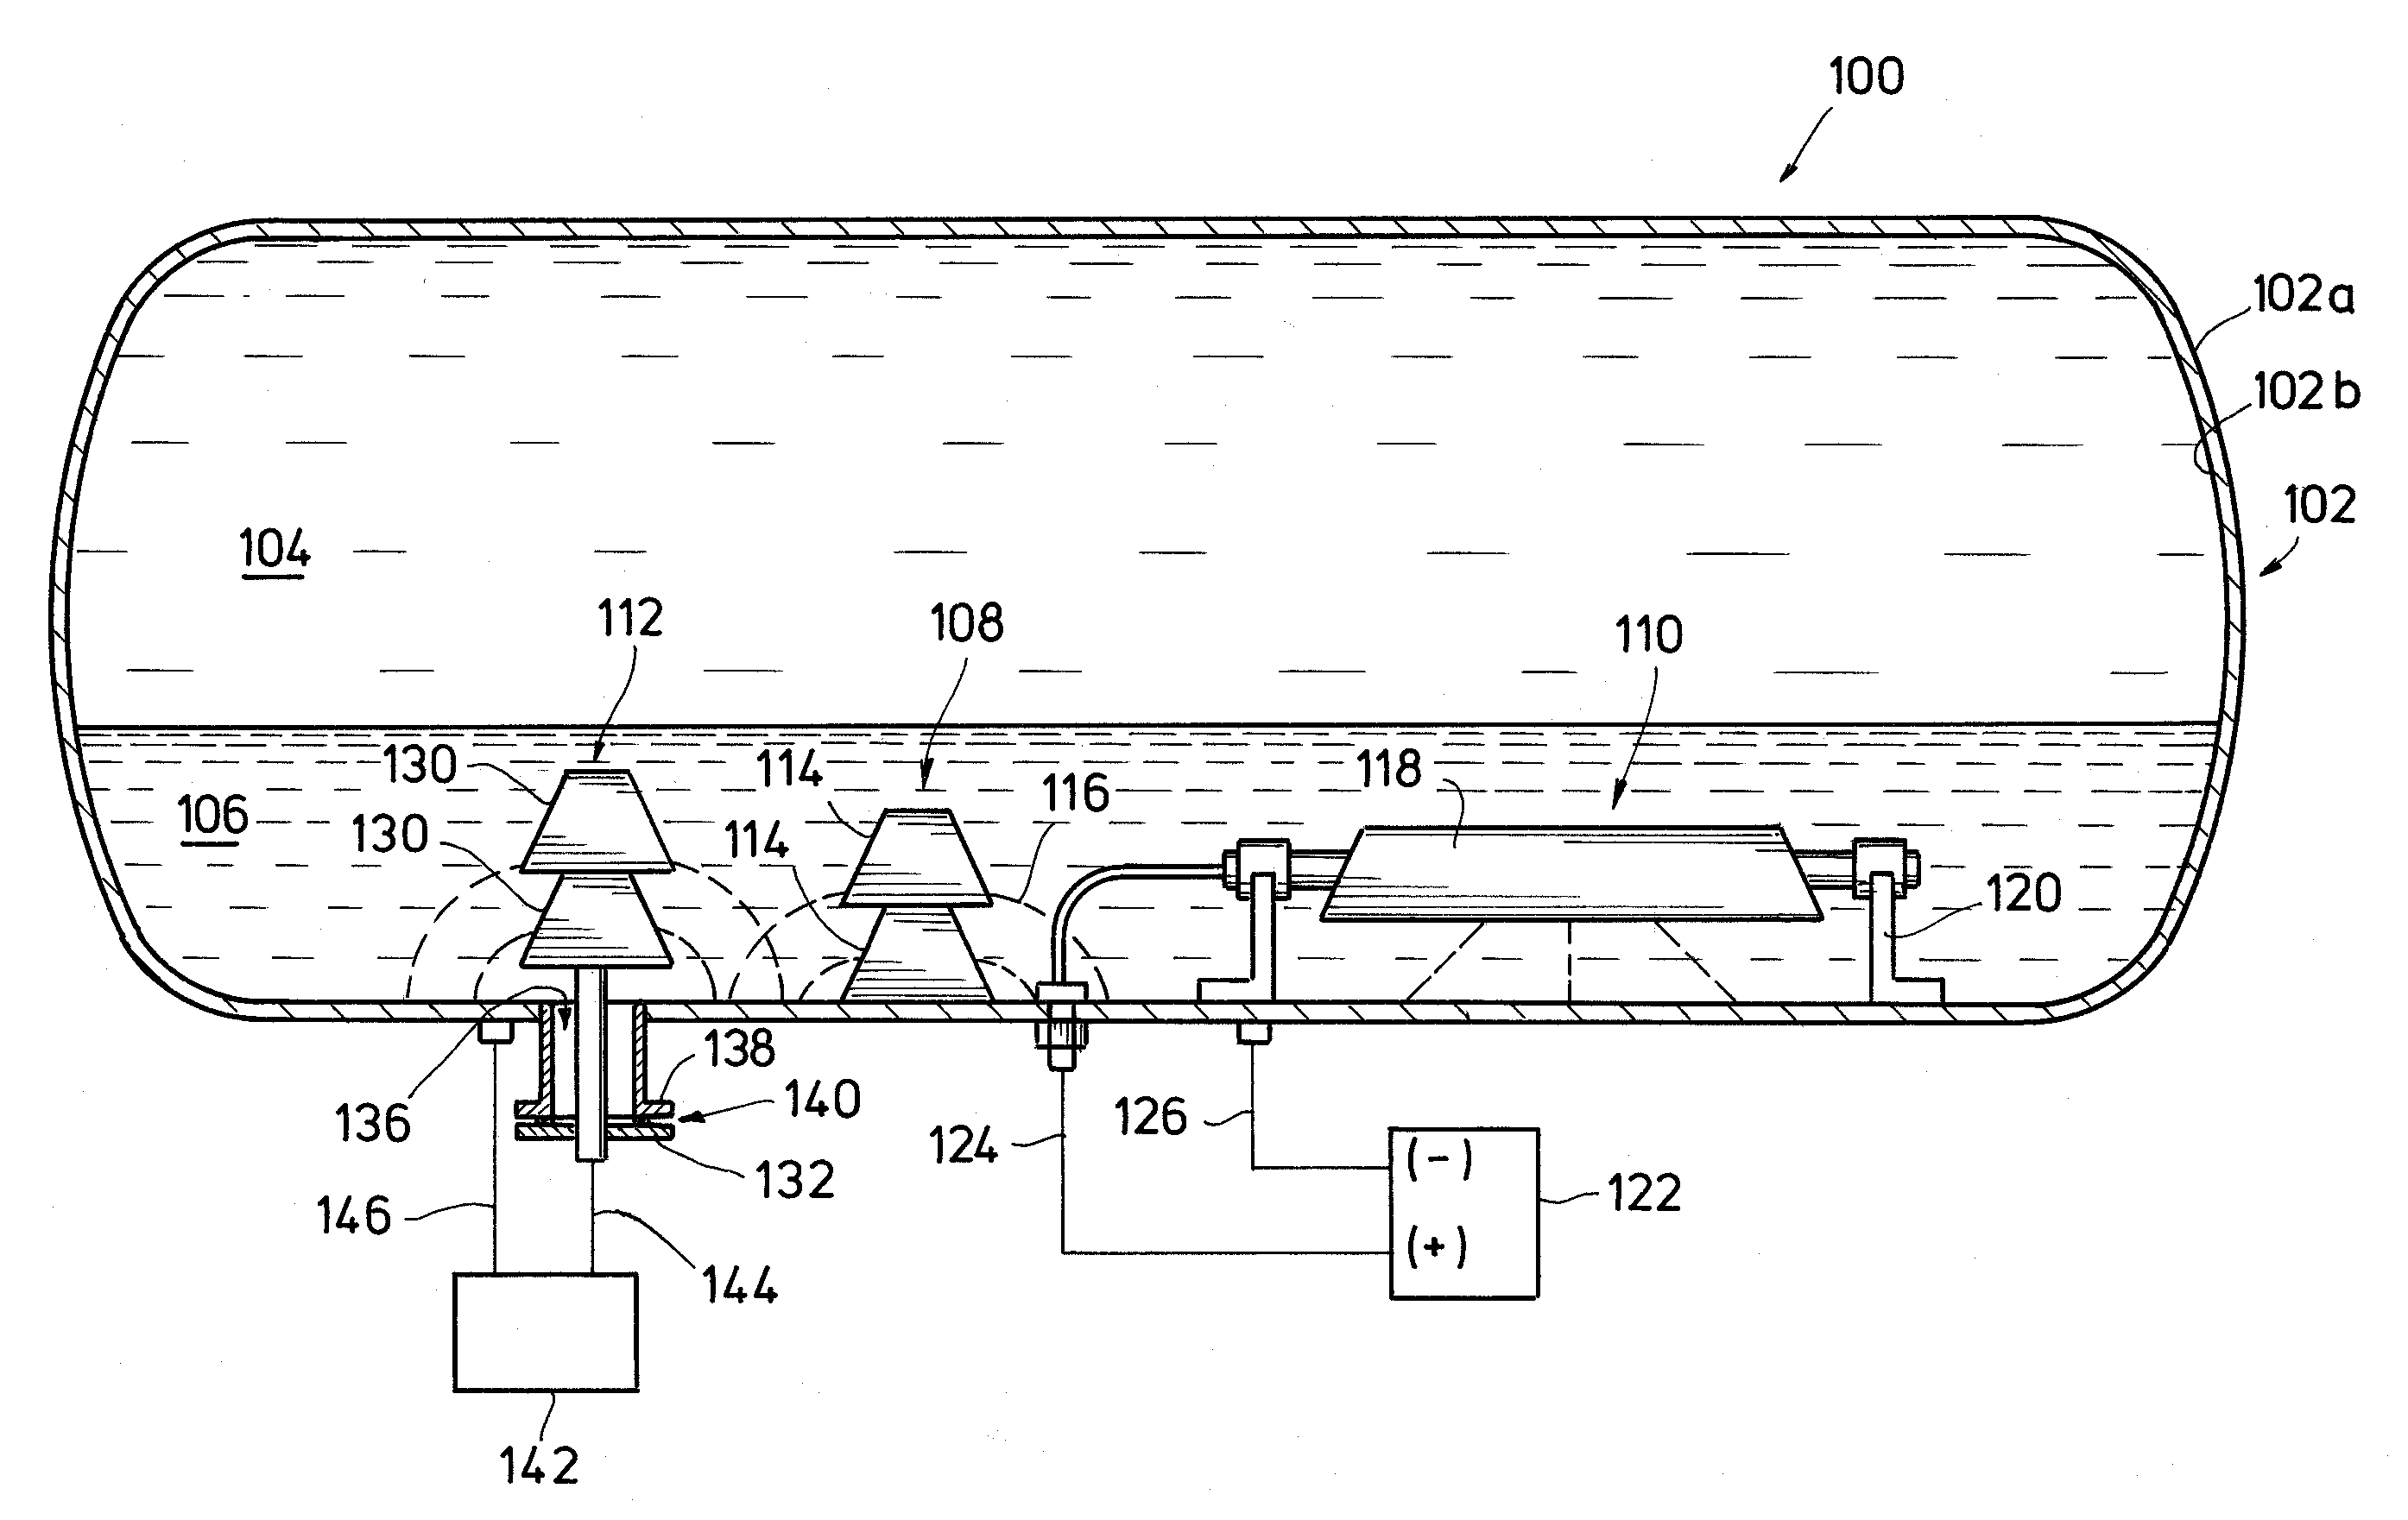 Cathodic protection automated current and potential measuring device for anodes protecting vessel internals